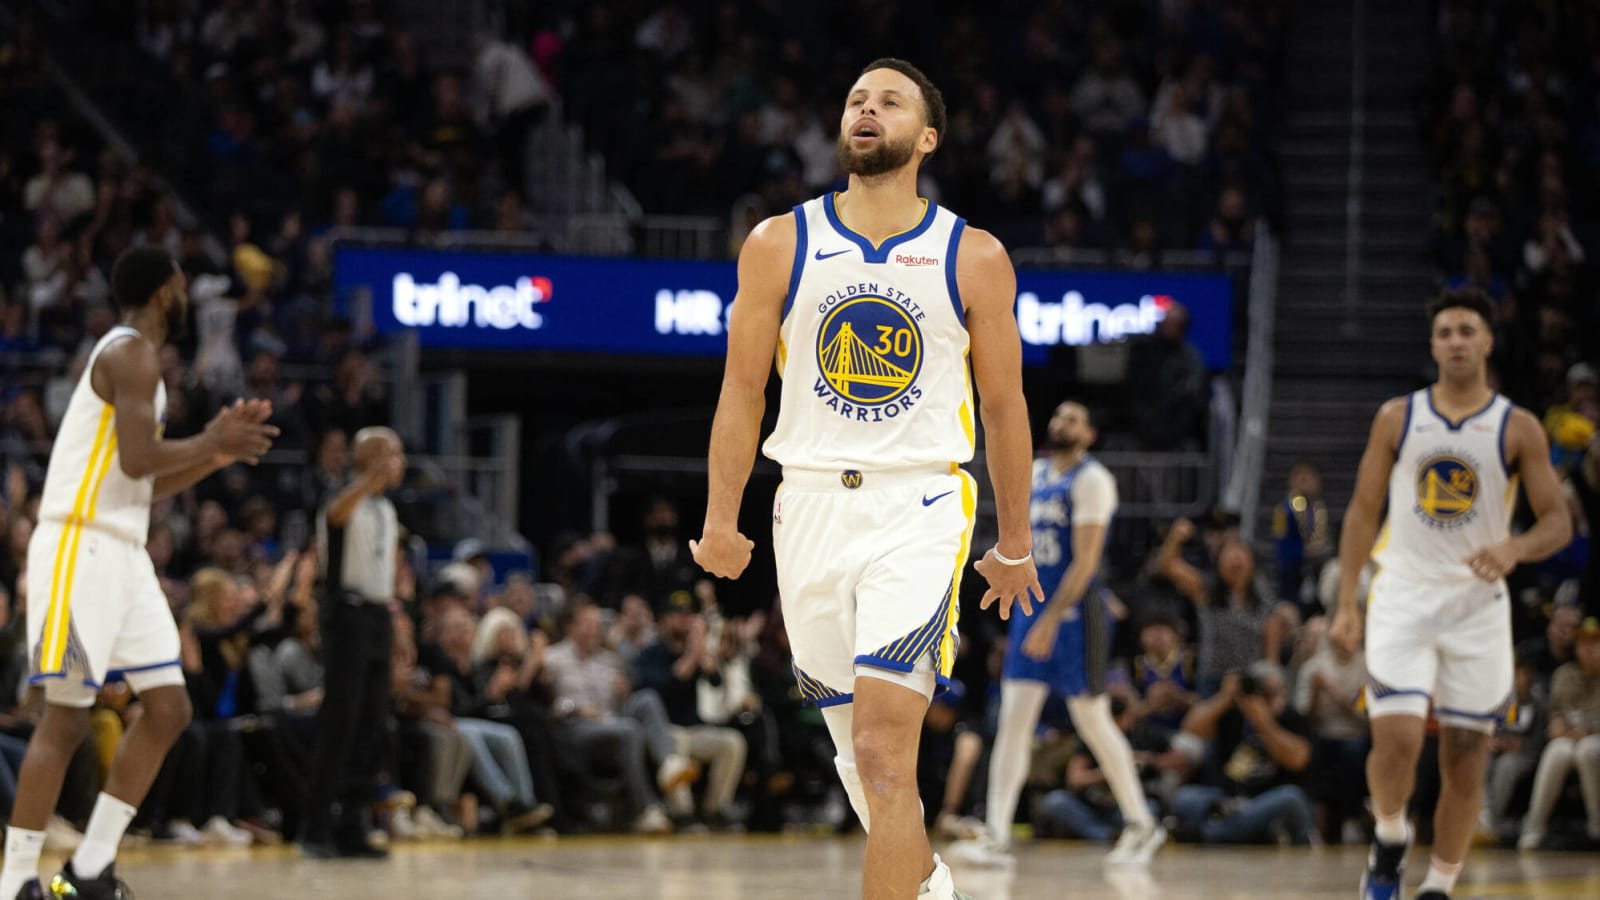 'Who’s gonna be tuning in more to?' NBA athletes claim Stephen Curry and the Golden State Warriors draw more box-office than the Los Angeles Lakers